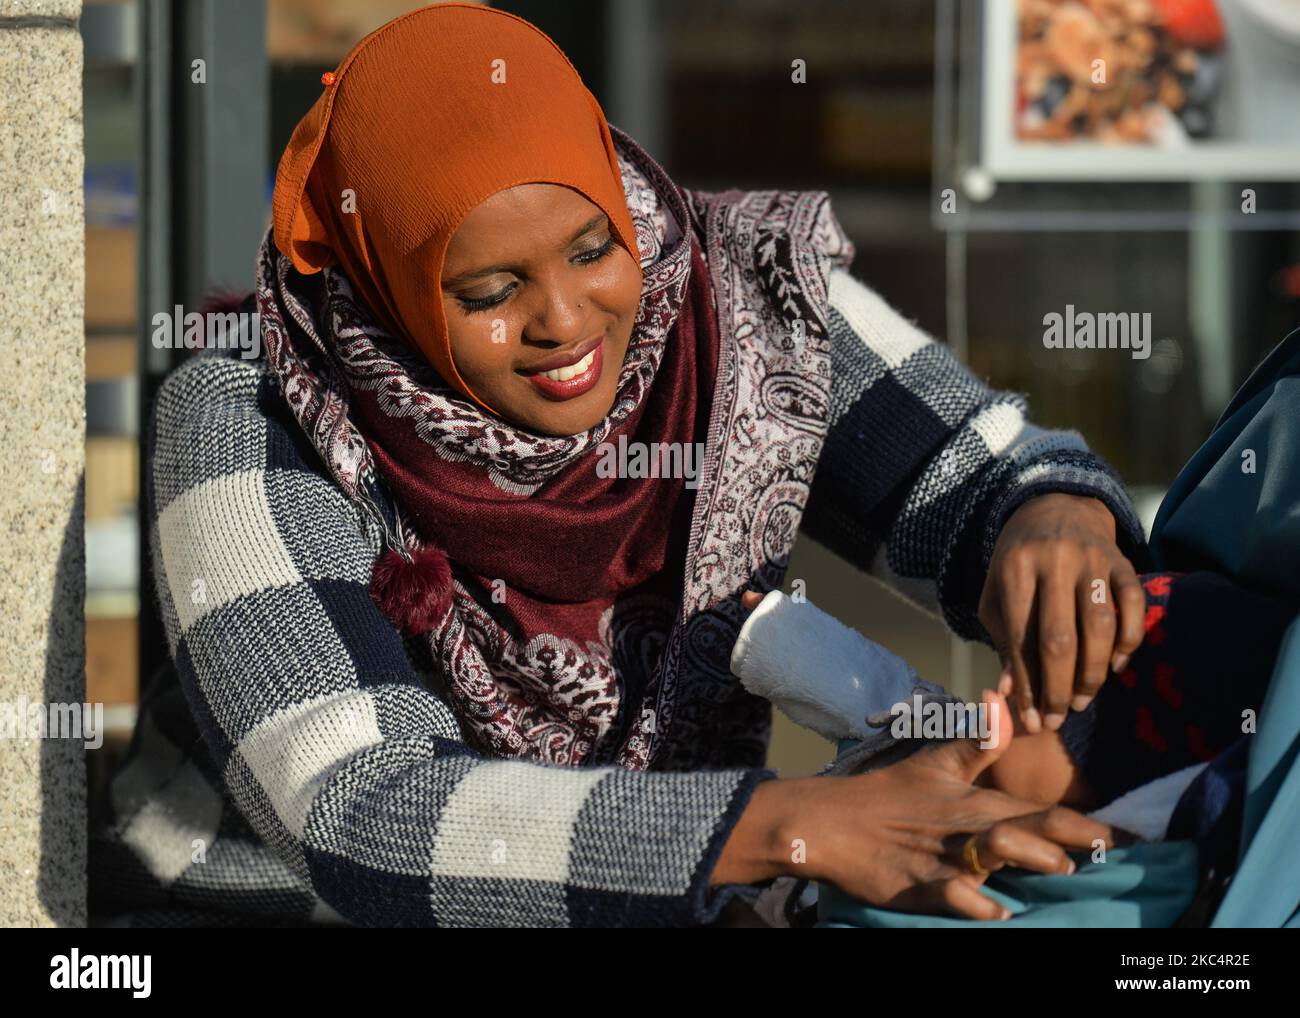 Ifrah Ahmed, a Somali-Irish social activist seen with her daughter in Dublin city center. Born into a refugee camp in war-torn Somalia, Ifrah was trafficked to Ireland as a teenager. Recounting her traumatic childhood experiences of Female Genital Mutilation / Cutting (FGM/C) when applying for refugee status, she was again traumatized and decided to devote her life to the eradication of the practice. Ifrah emerged as one of the worlds foremost international activists against Gender Based Violence, after she took her campaign all the way to the President of Ireland and finally to the European P Stock Photo